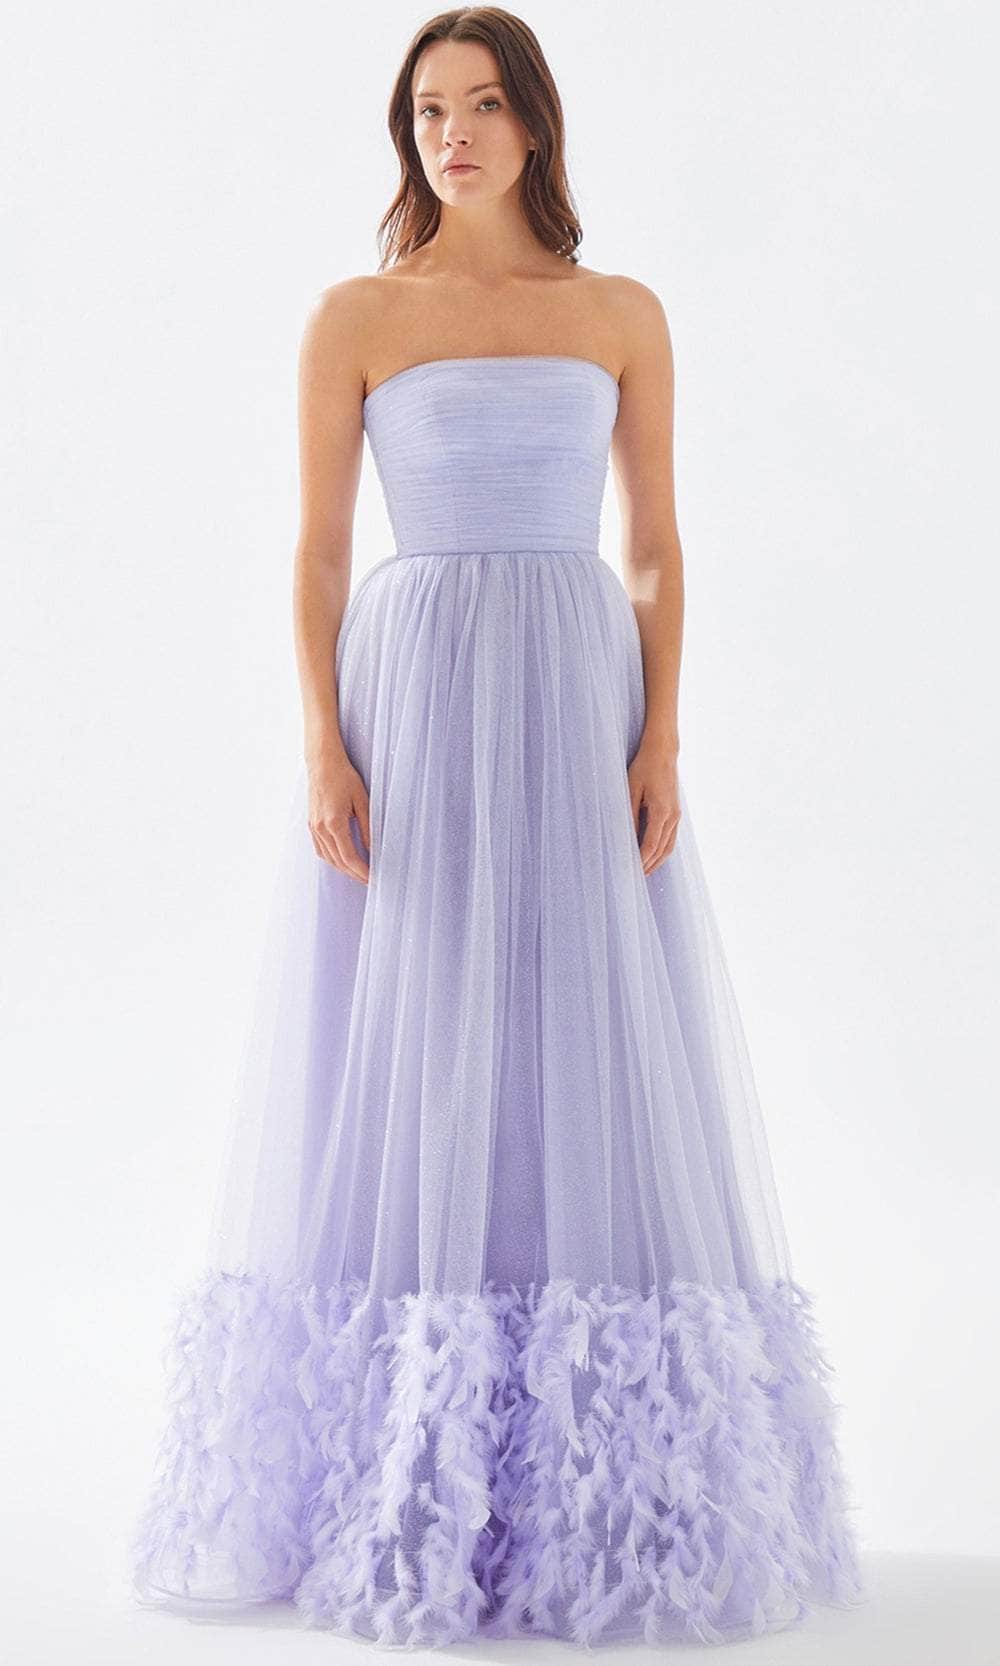 Tarik Ediz 52140 - Ruched Strapless Feathered Prom Gown
